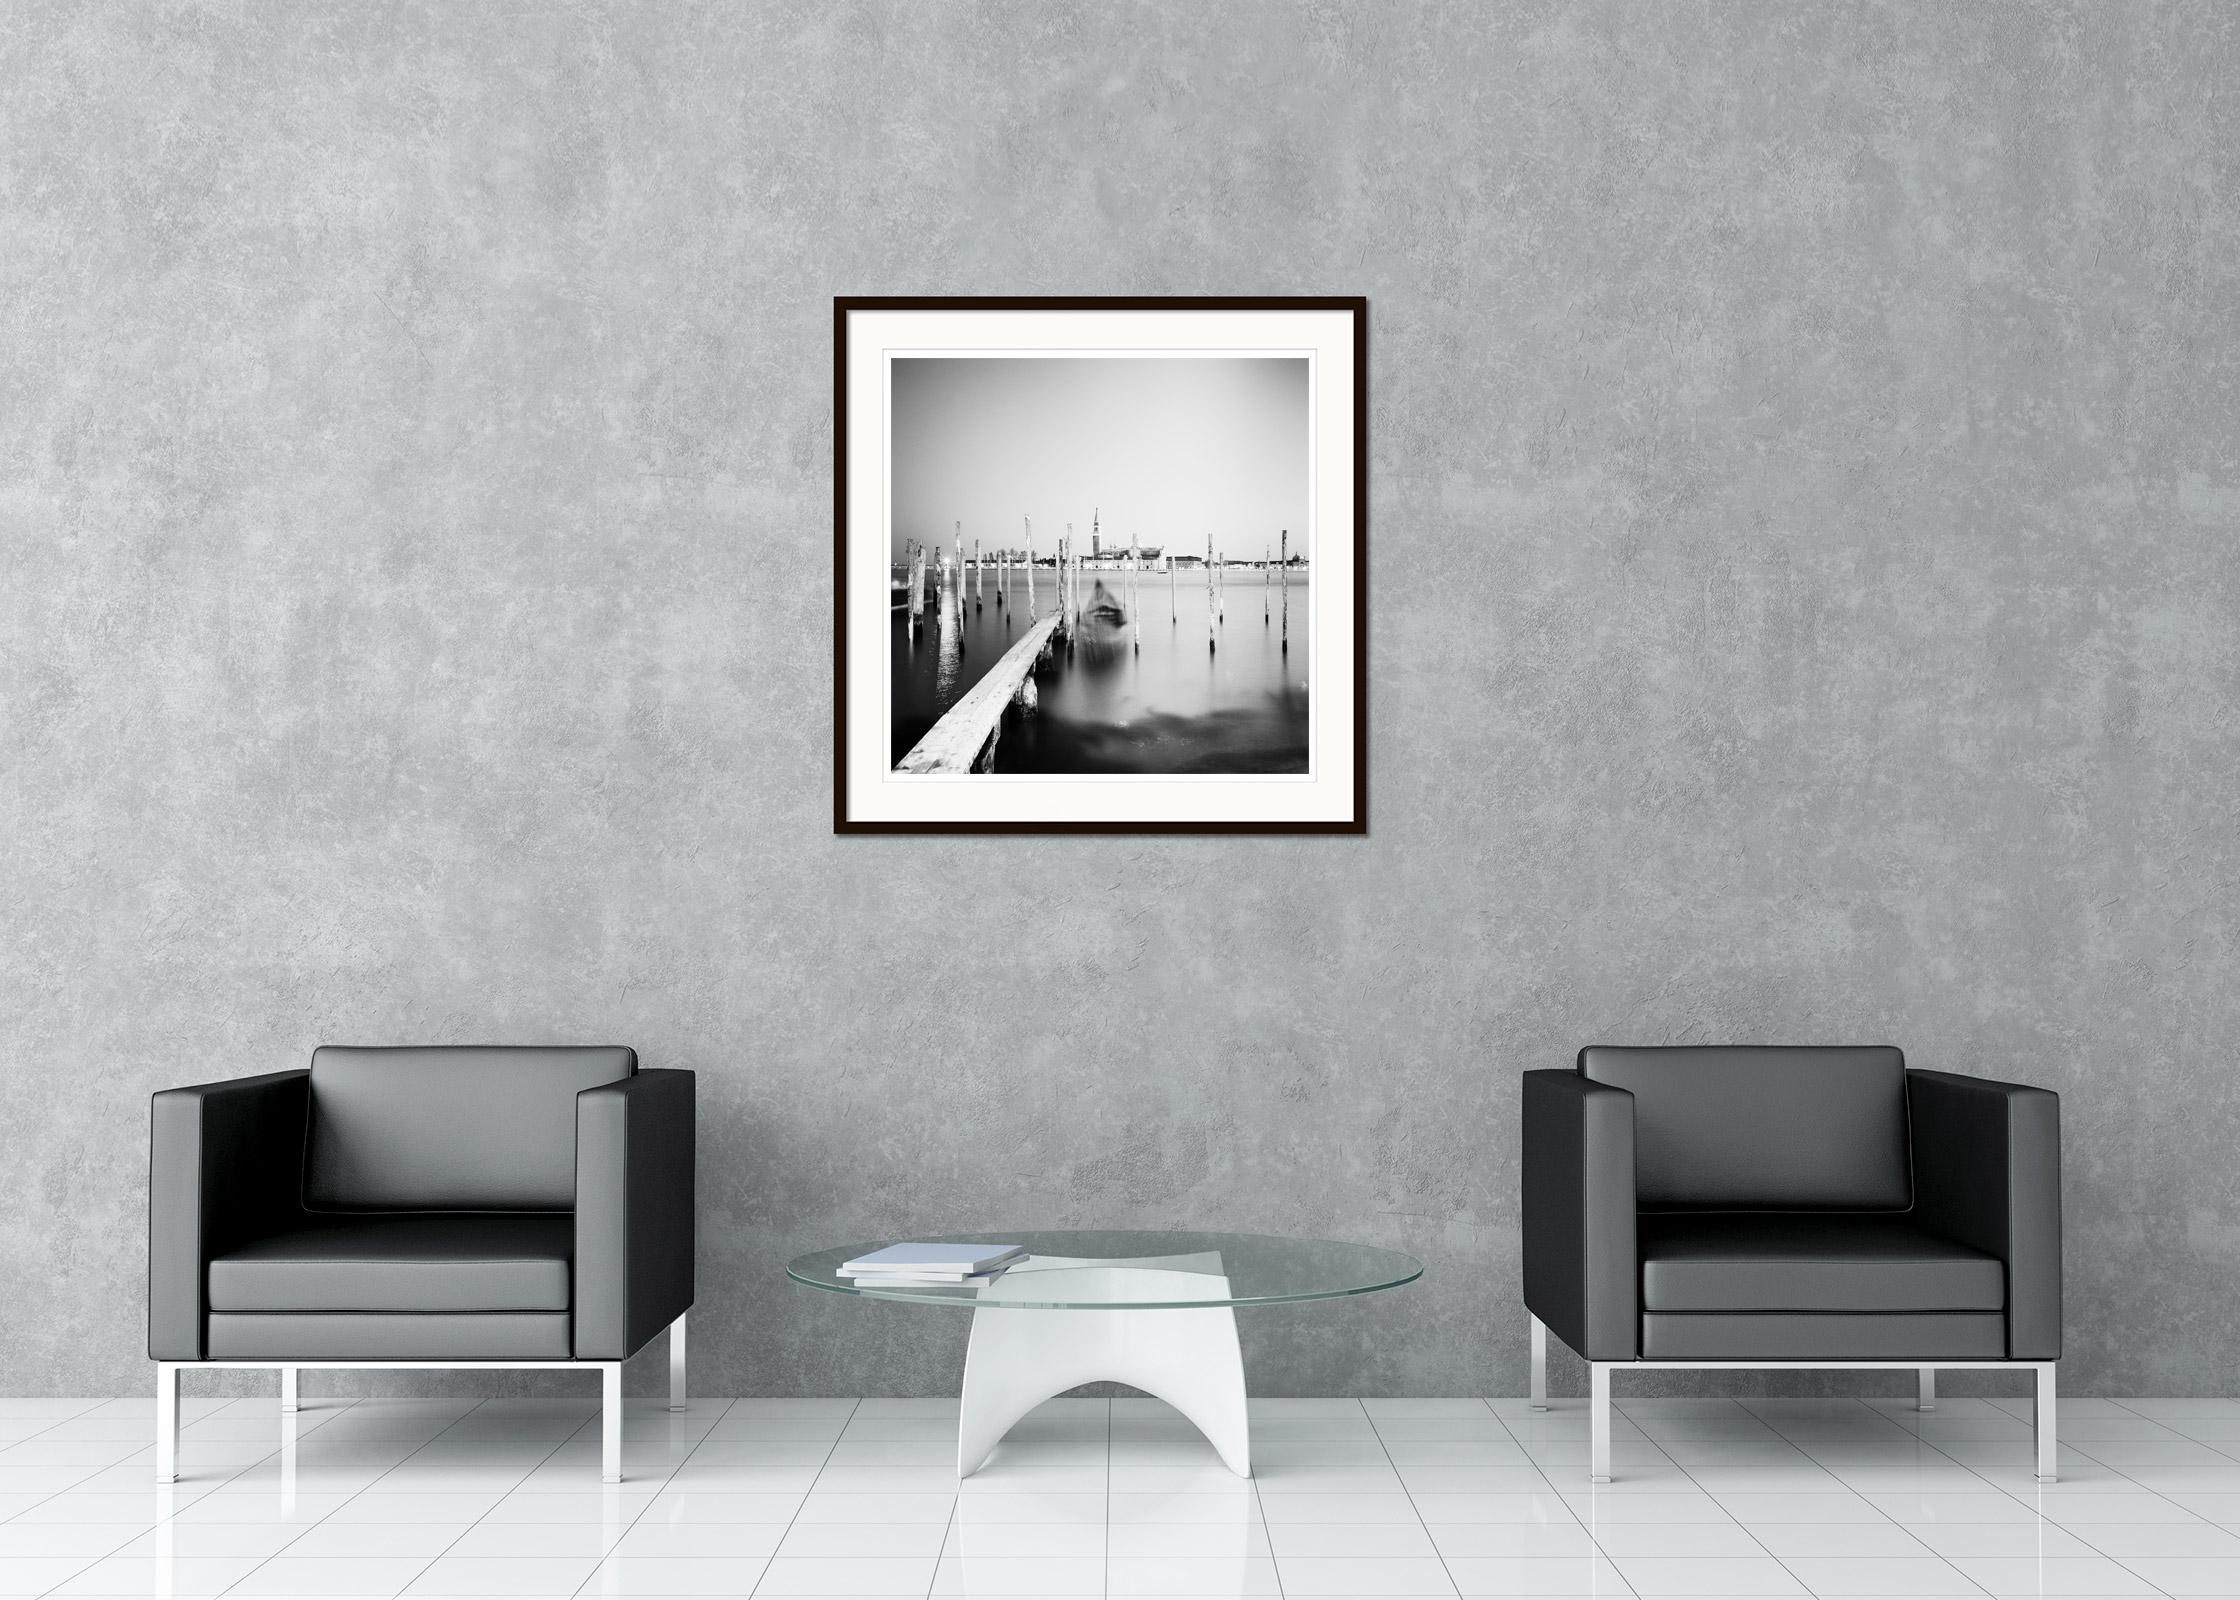 Black and white fine art long exposure waterscape - landscape photography print. Gondola in the night in front of Basilica, Venice, Italy. Archival pigment ink print, edition of 9. Signed, titled, dated and numbered by artist. Certificate of